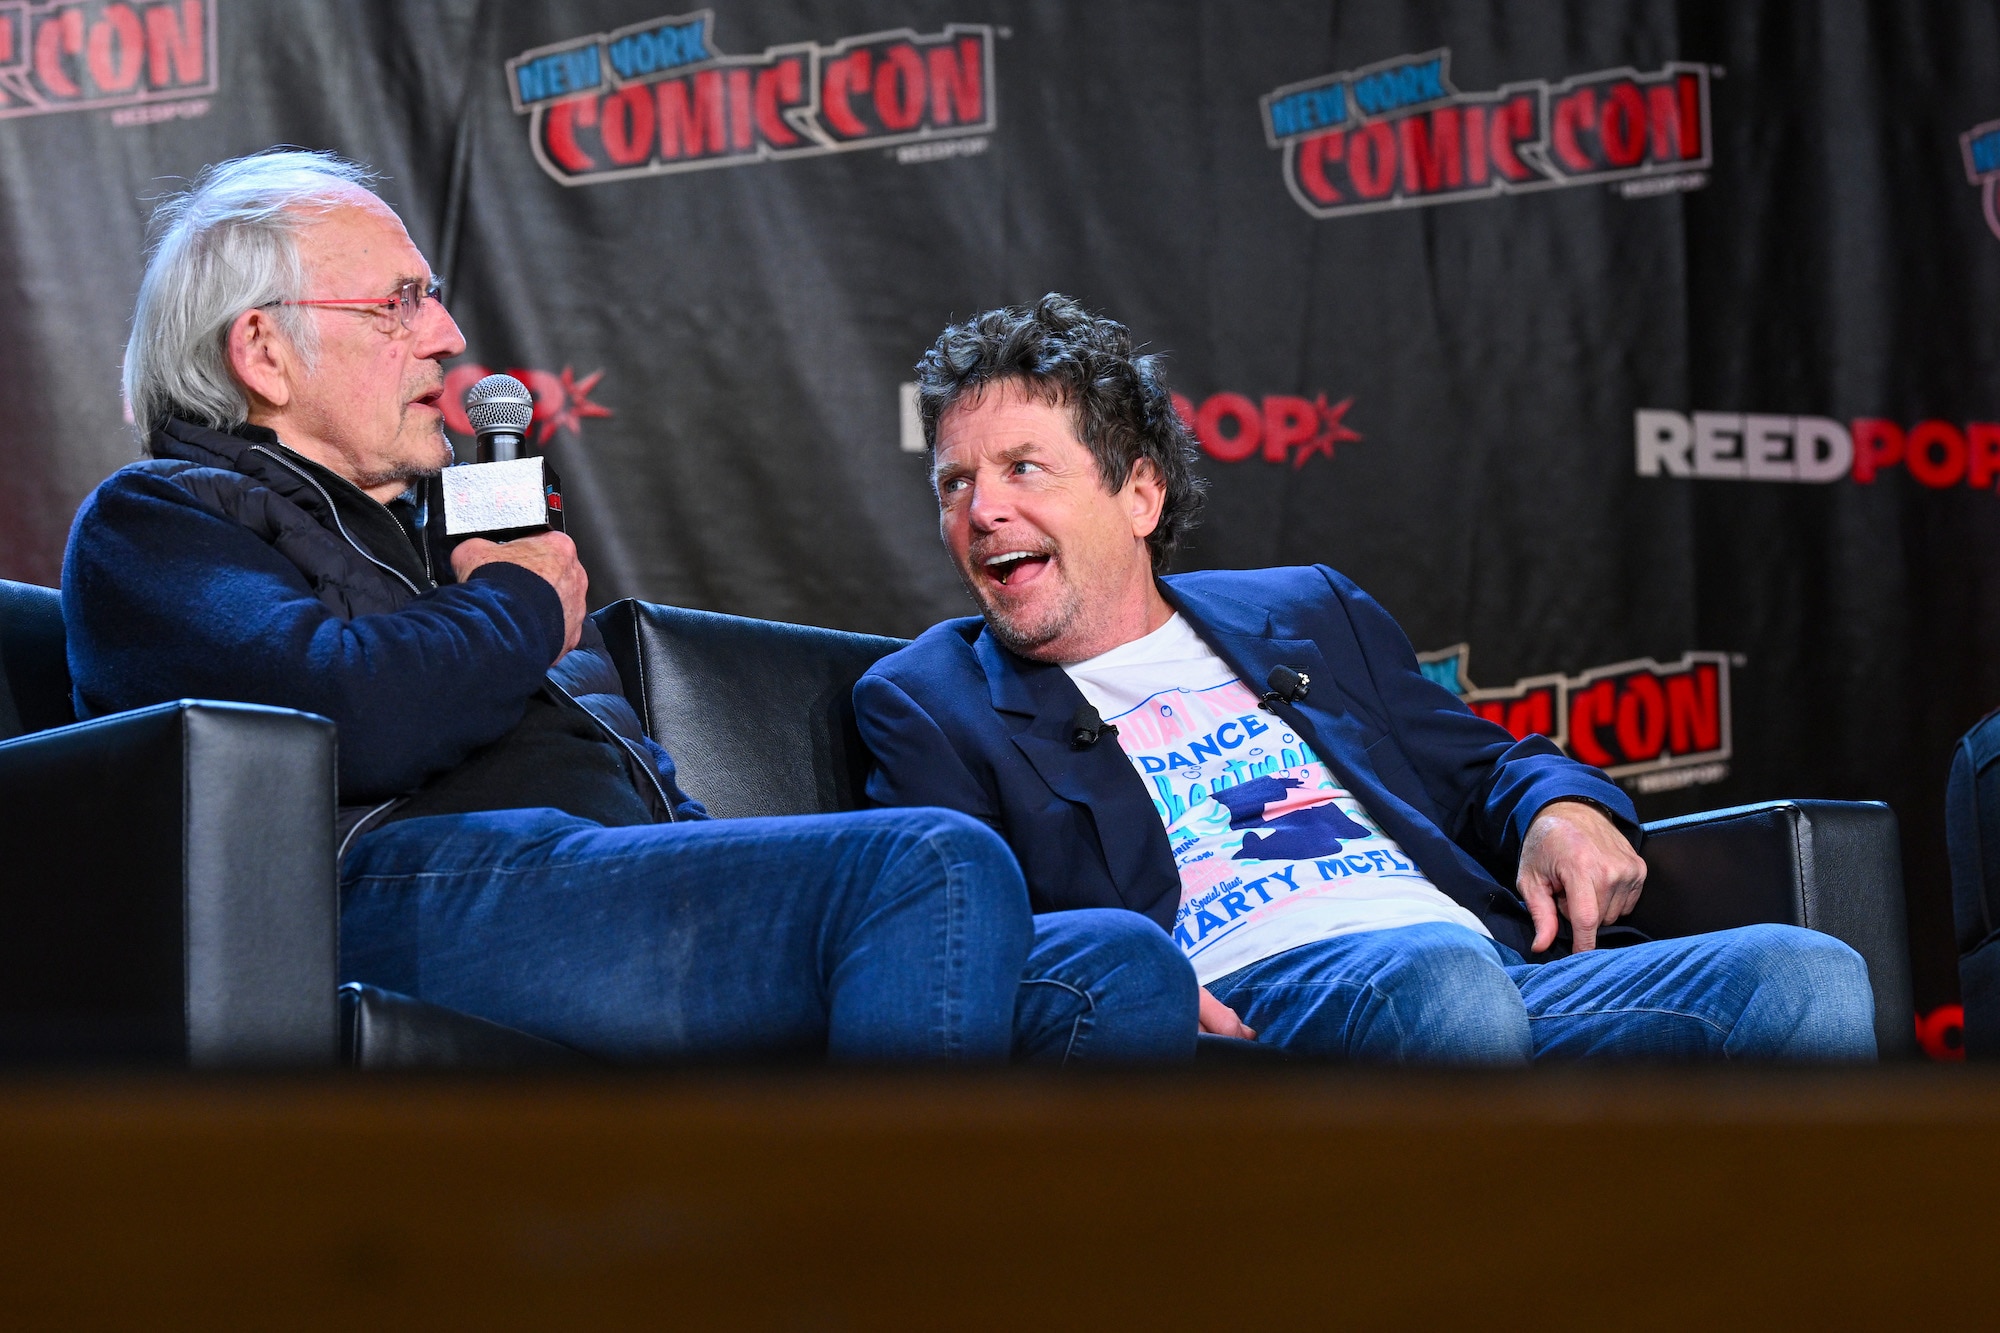 Michael J. Fox and Christopher Lloyd reminiscence about ‘Back to the Future’ at NYCC